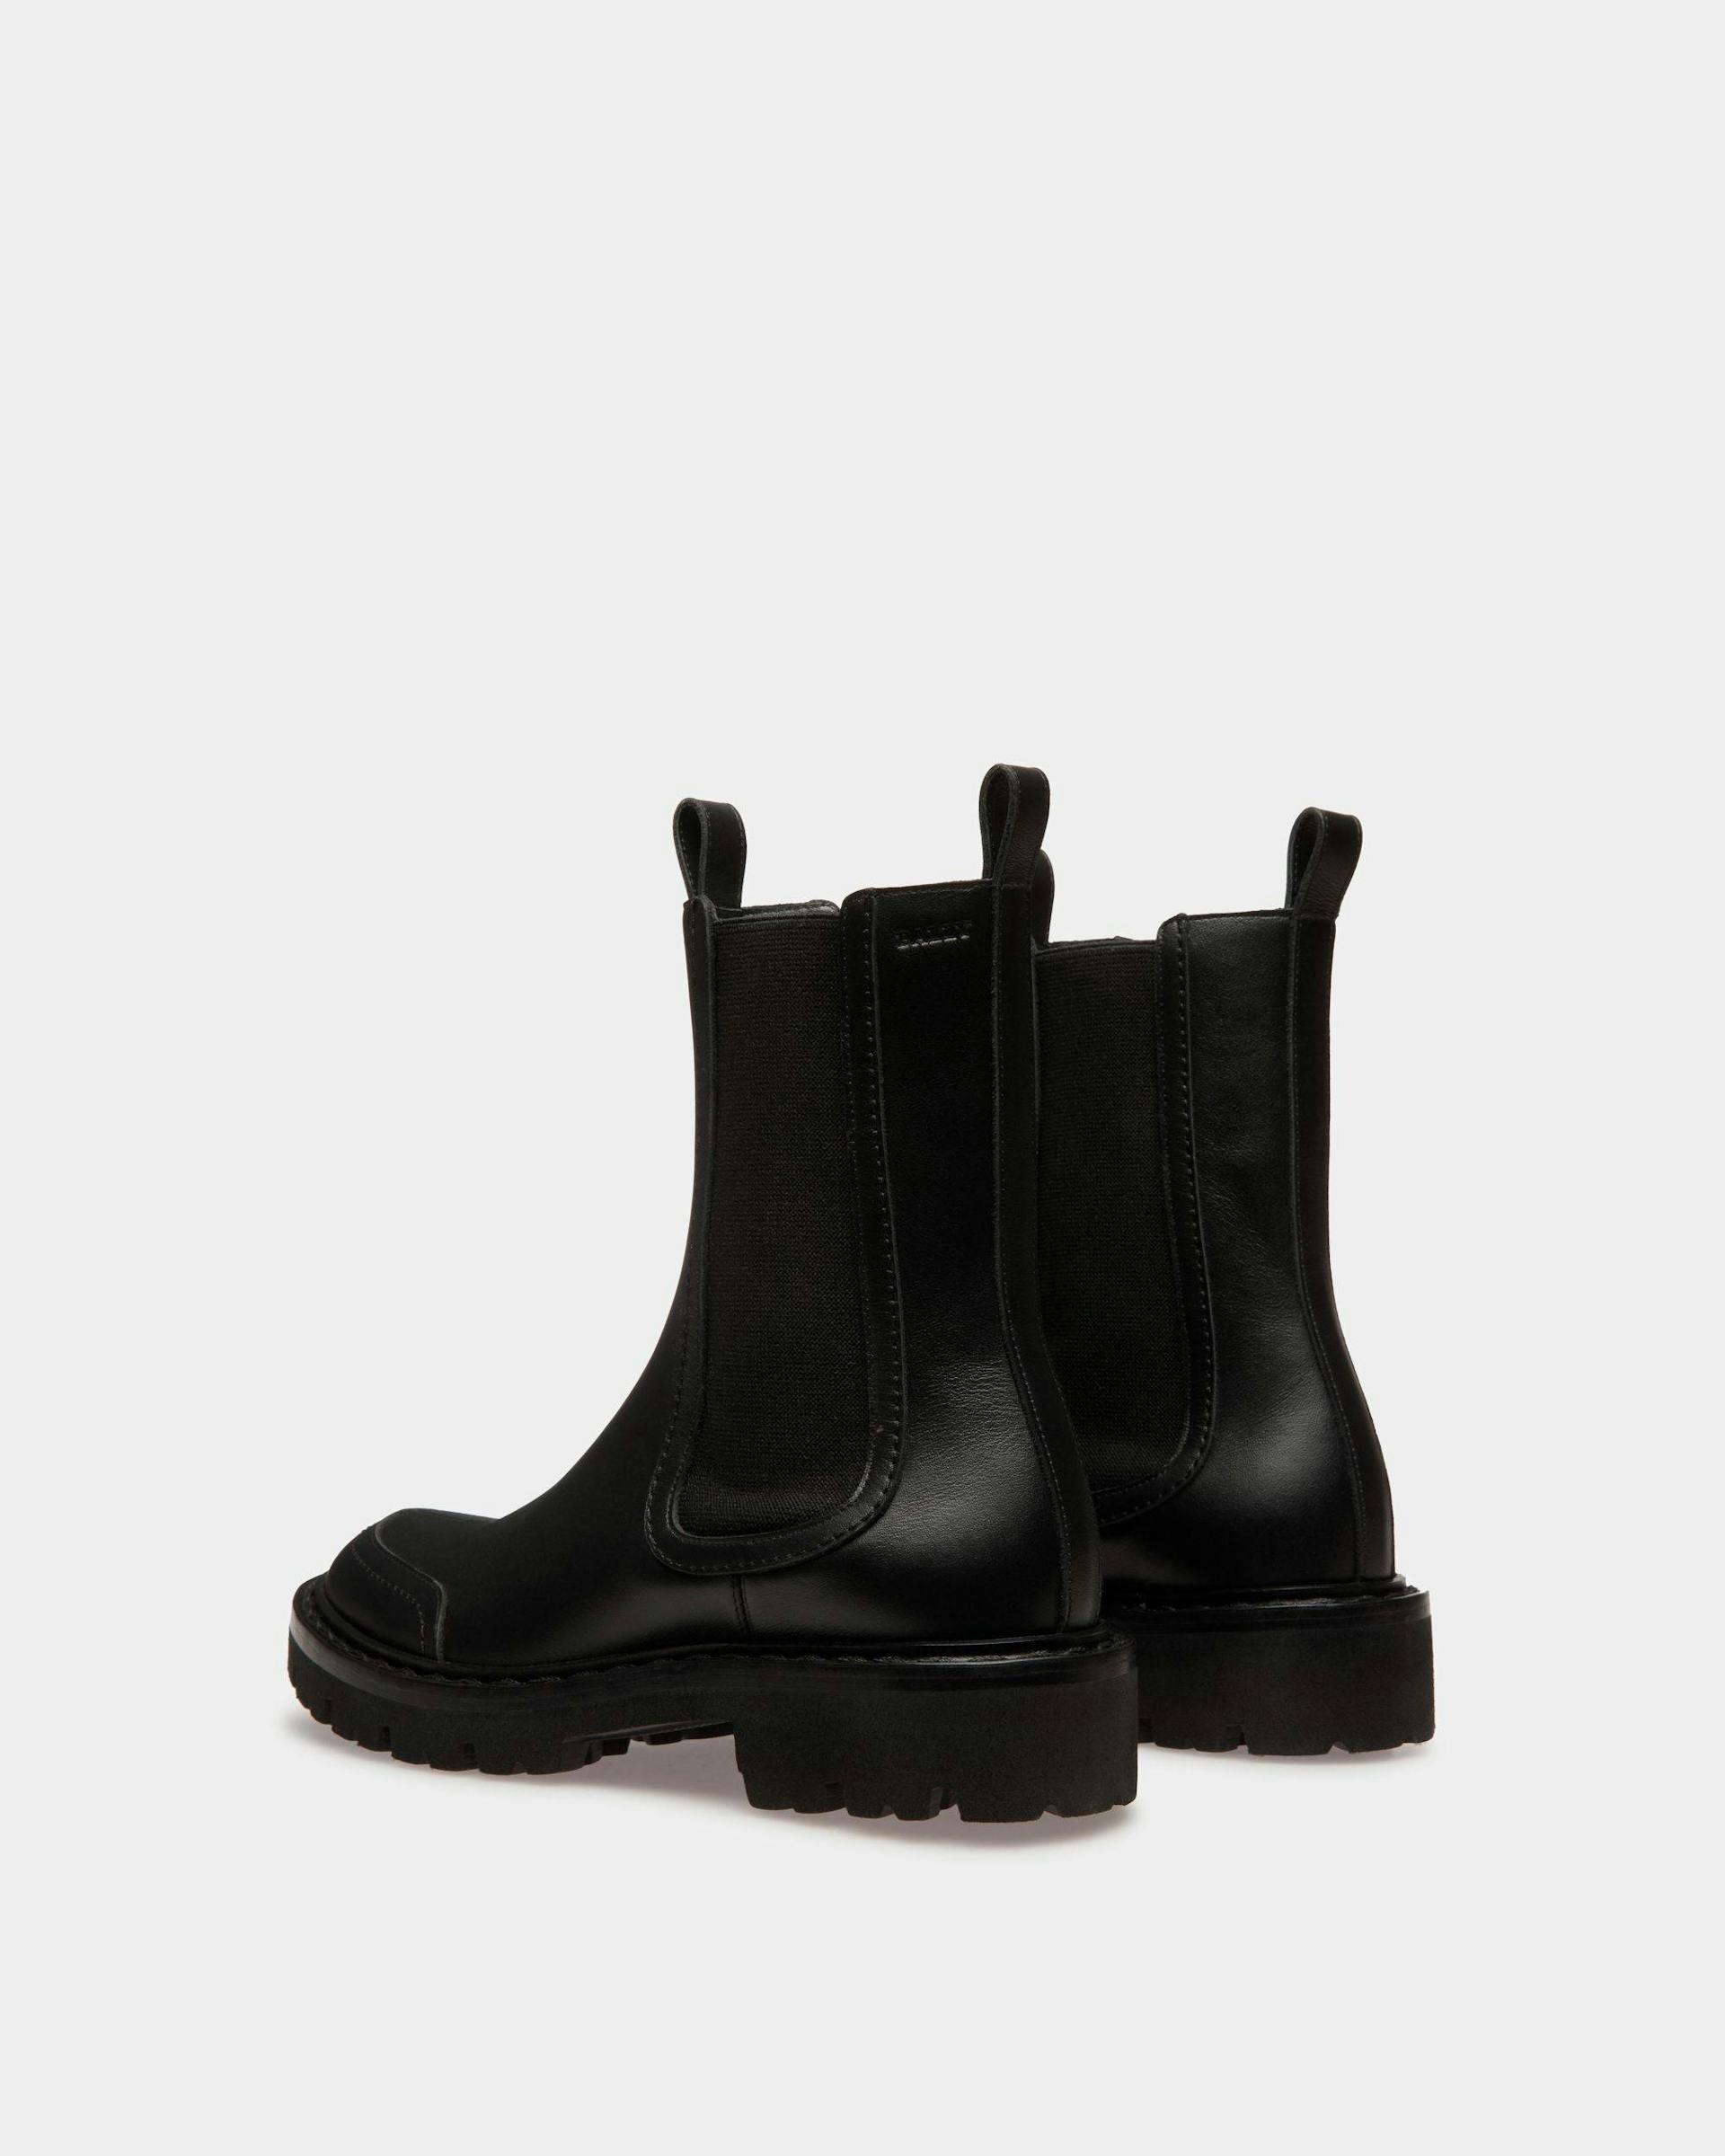 Women's Enga Boots In Black Leather | Bally | Still Life 3/4 Back